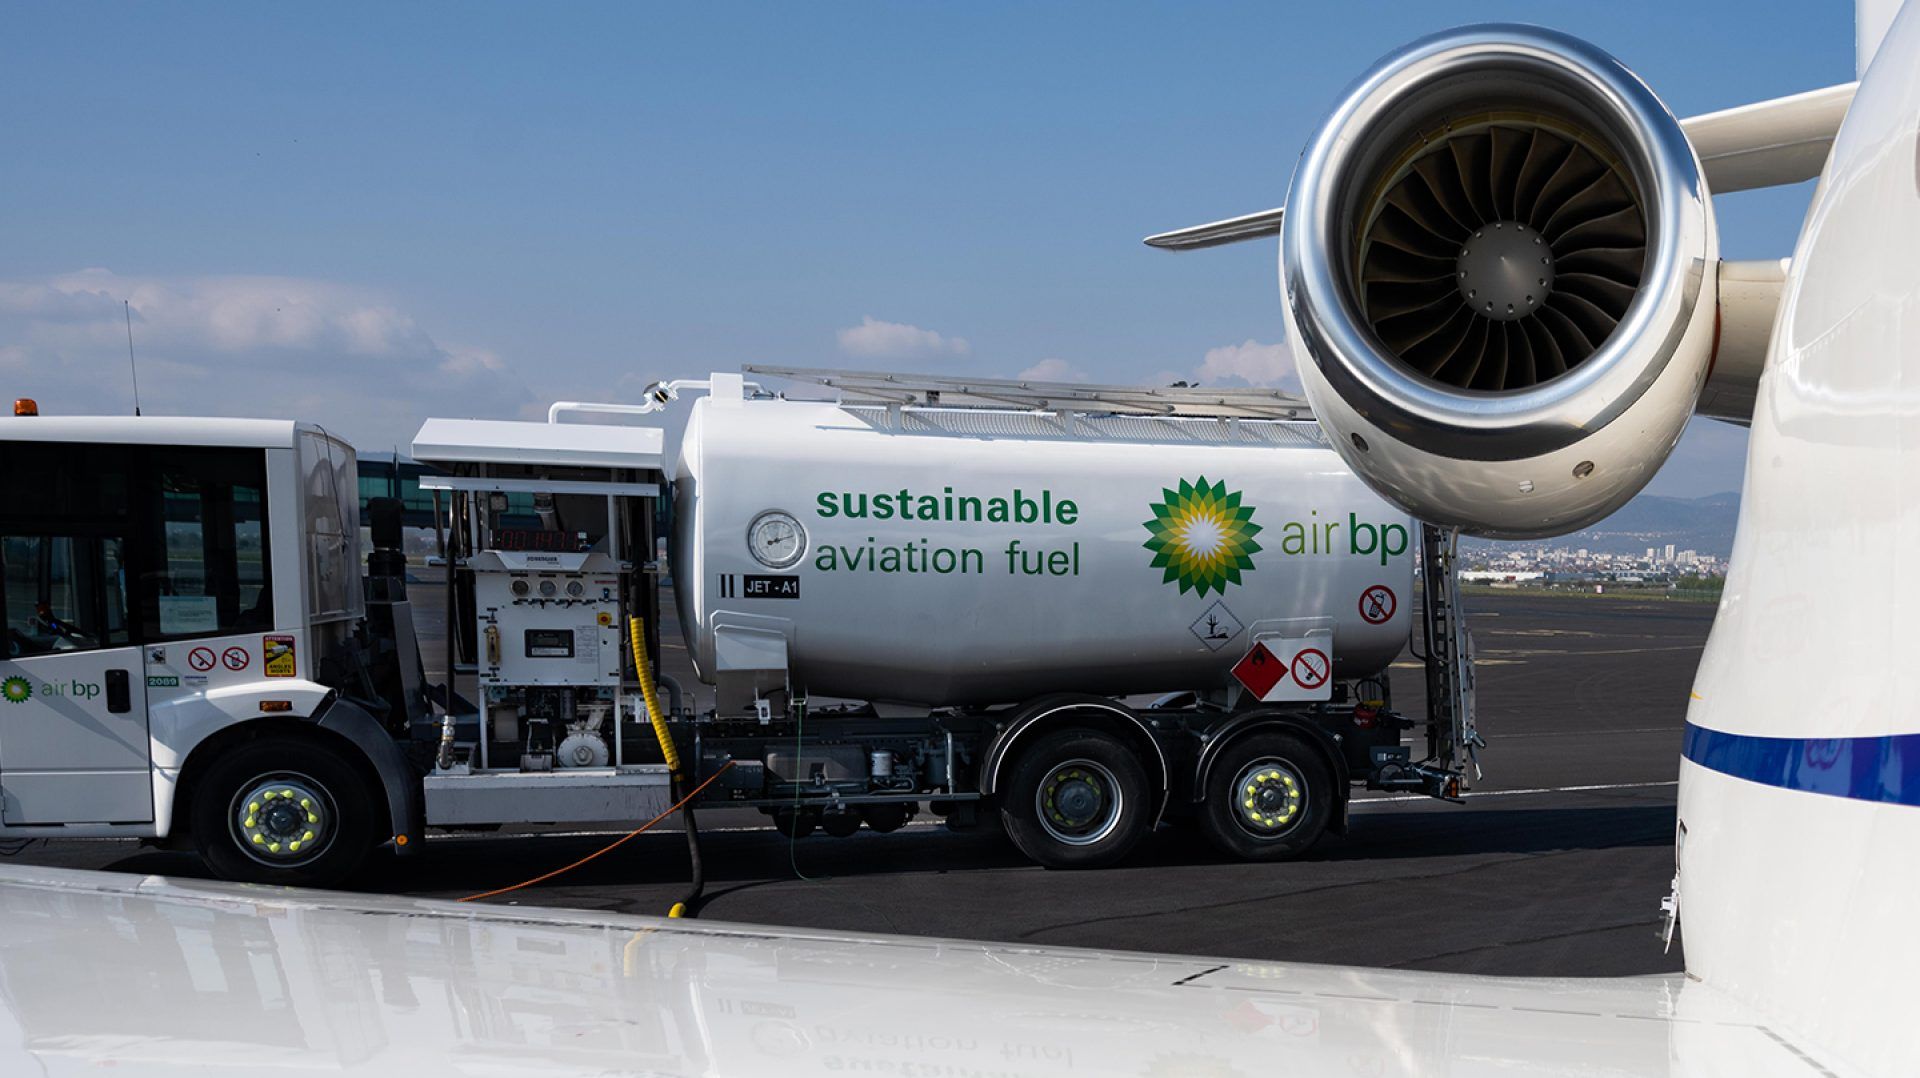 An Air bp Sustainable aviation fuel vehicle next to a small jet aircraft.